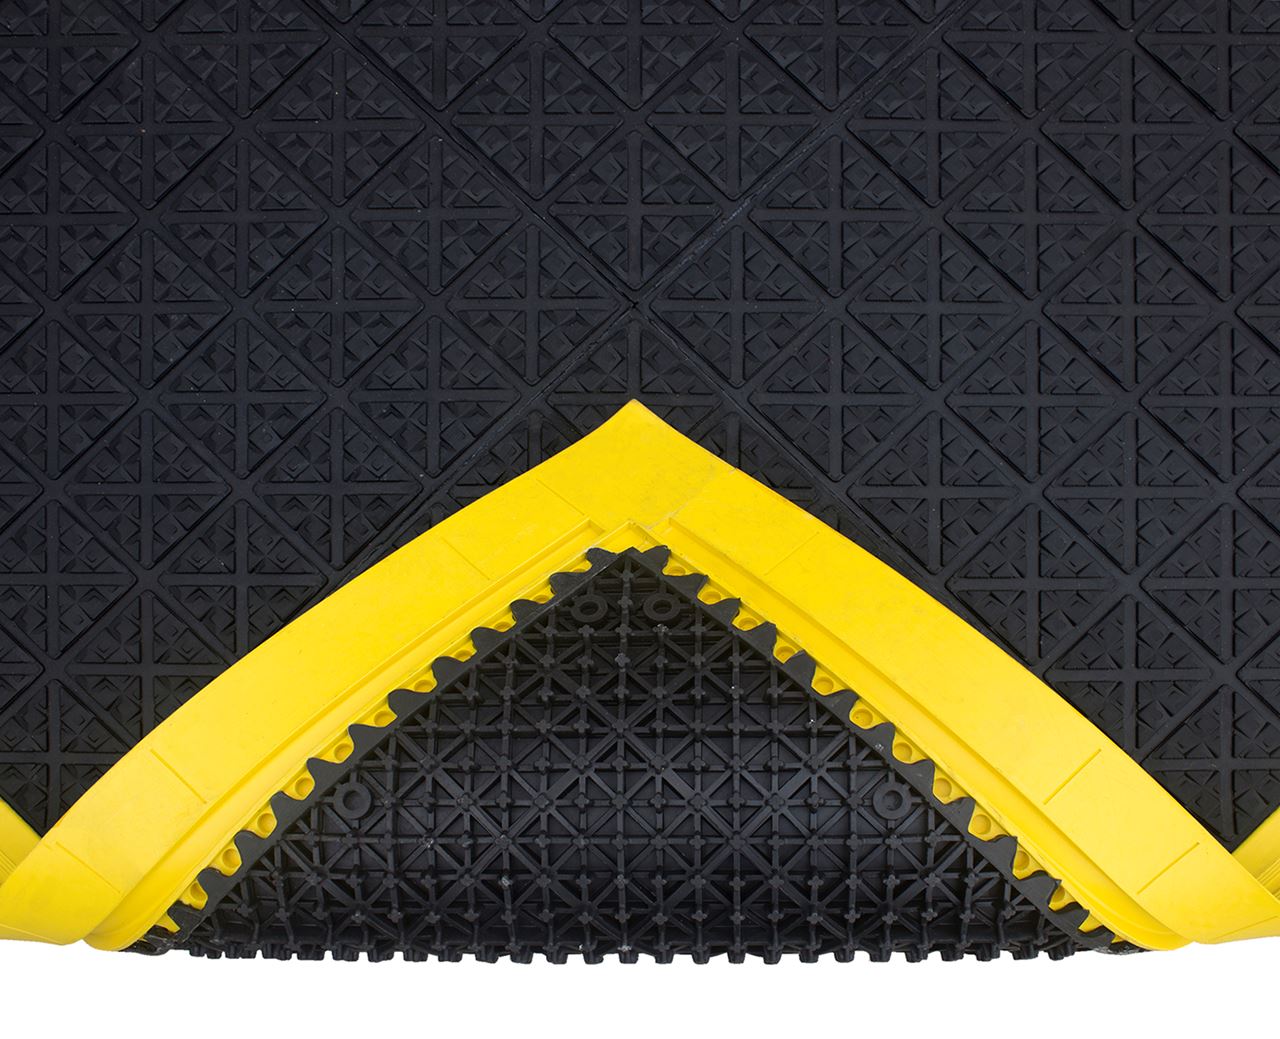 Stop-N-Dry  Industrial Rubber Anti-Fatigue Mats, Dock Bumpers